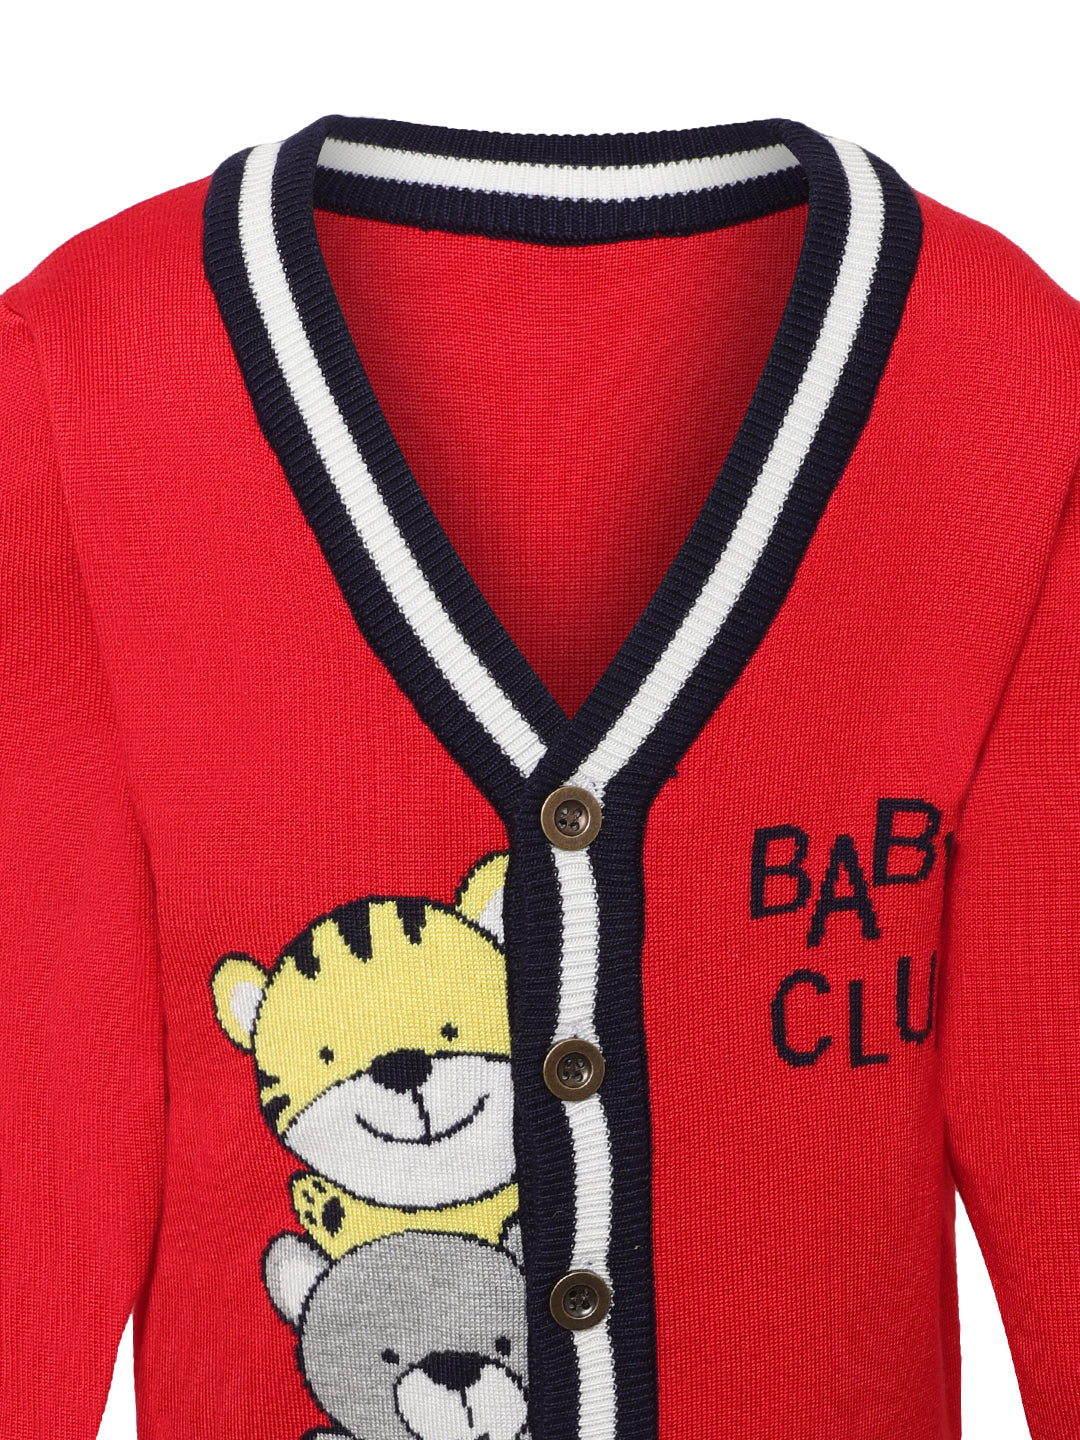 Giggles & Wiggles Boys Red Baby Club V Neck Printed Sweaters